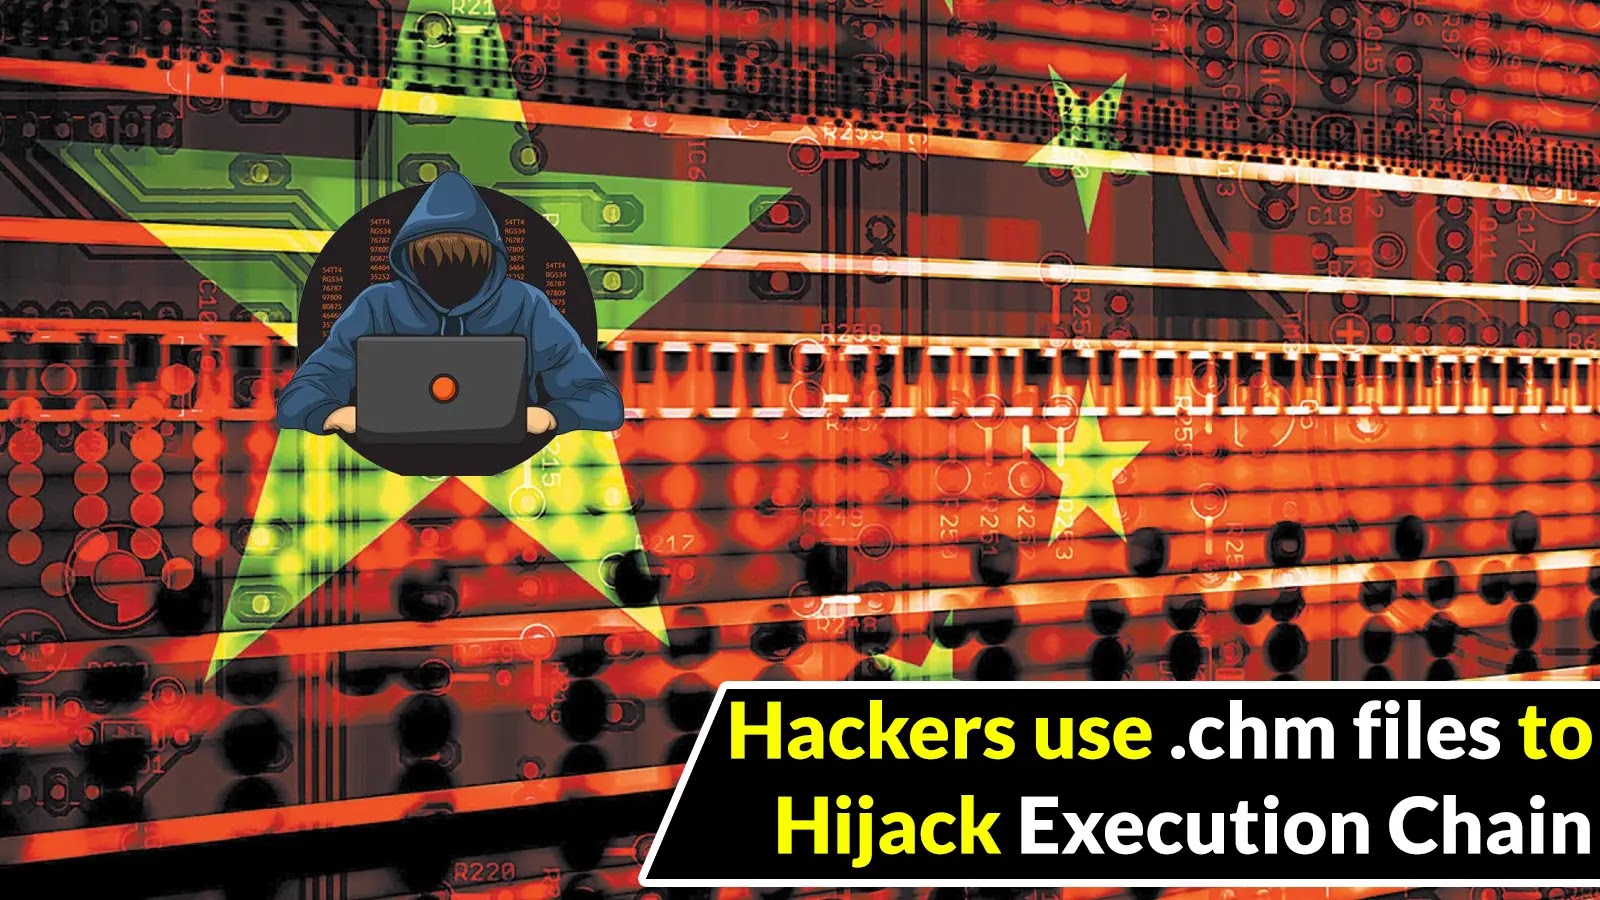 Chinese Hackers use .chm files to Hijack Execution Chain and Deploy Malware